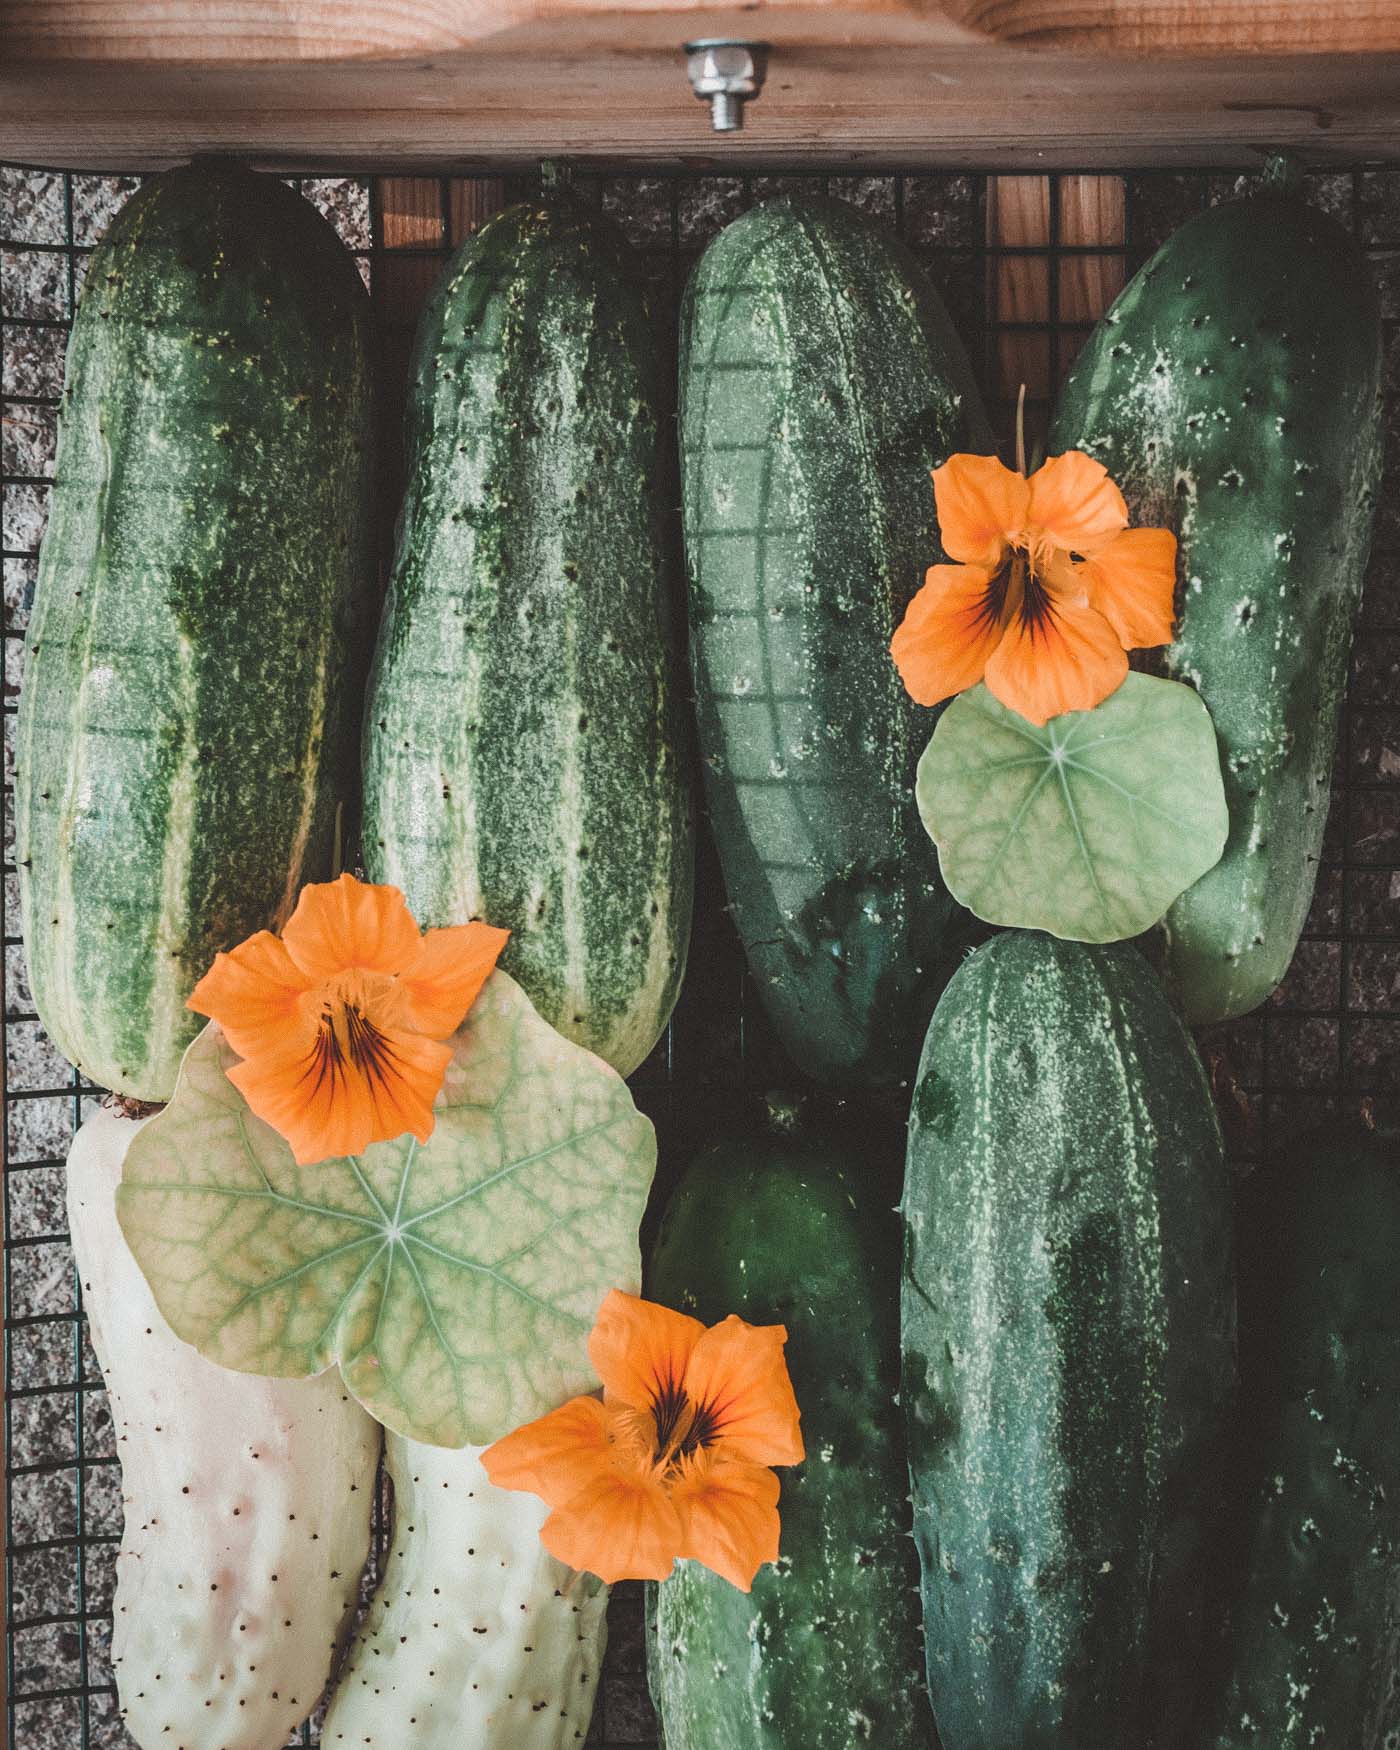 cucumbers from the garden